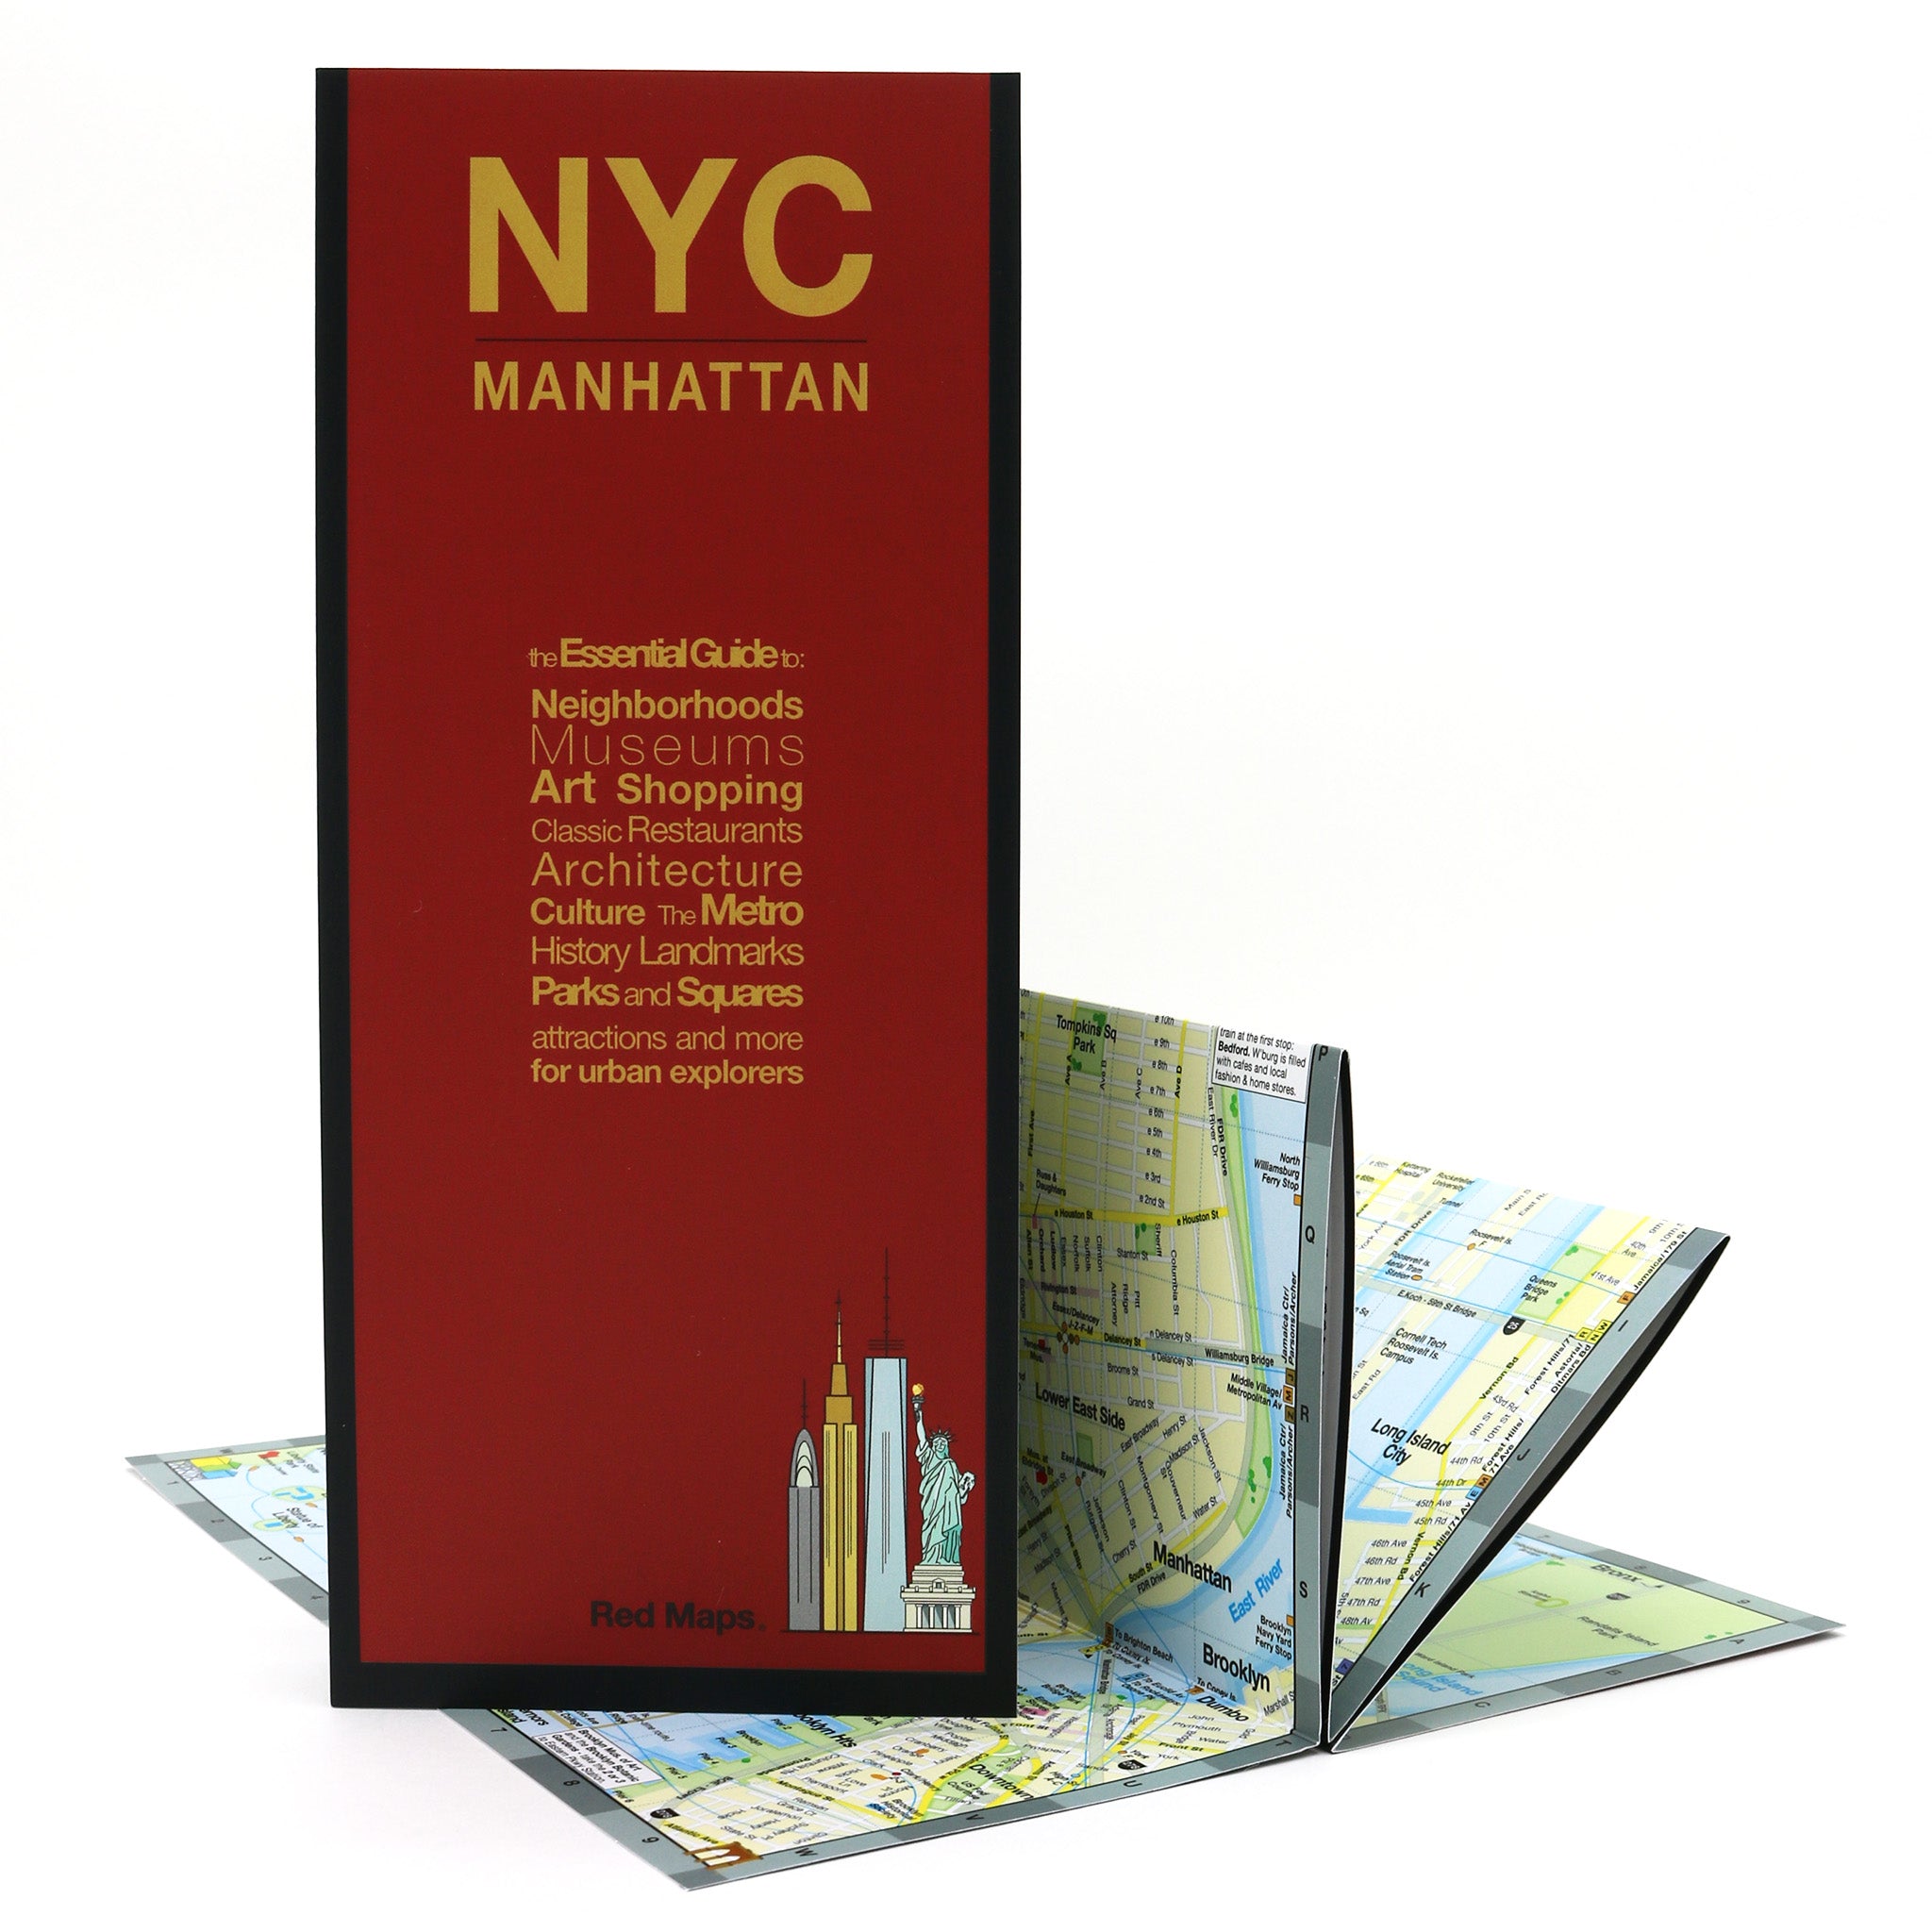 Manhattan map showing popular attractions and streets in neighborhoods.